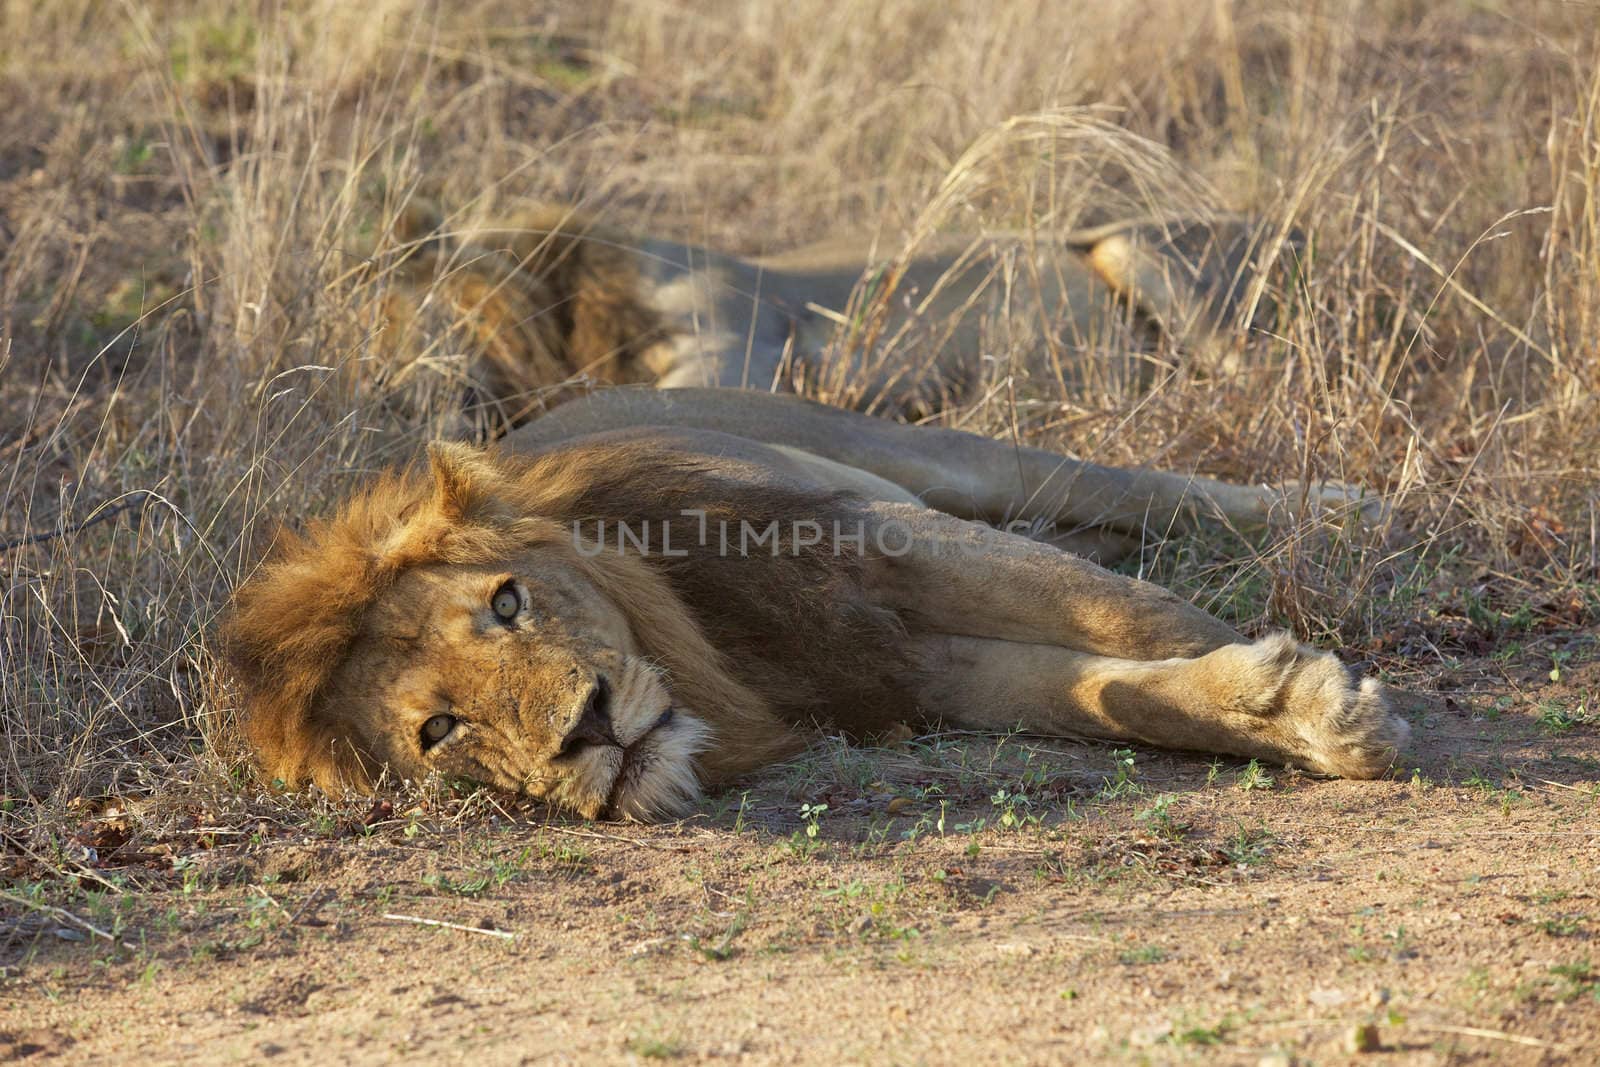 Male lions resting in the Kruger National Park, South Africa.